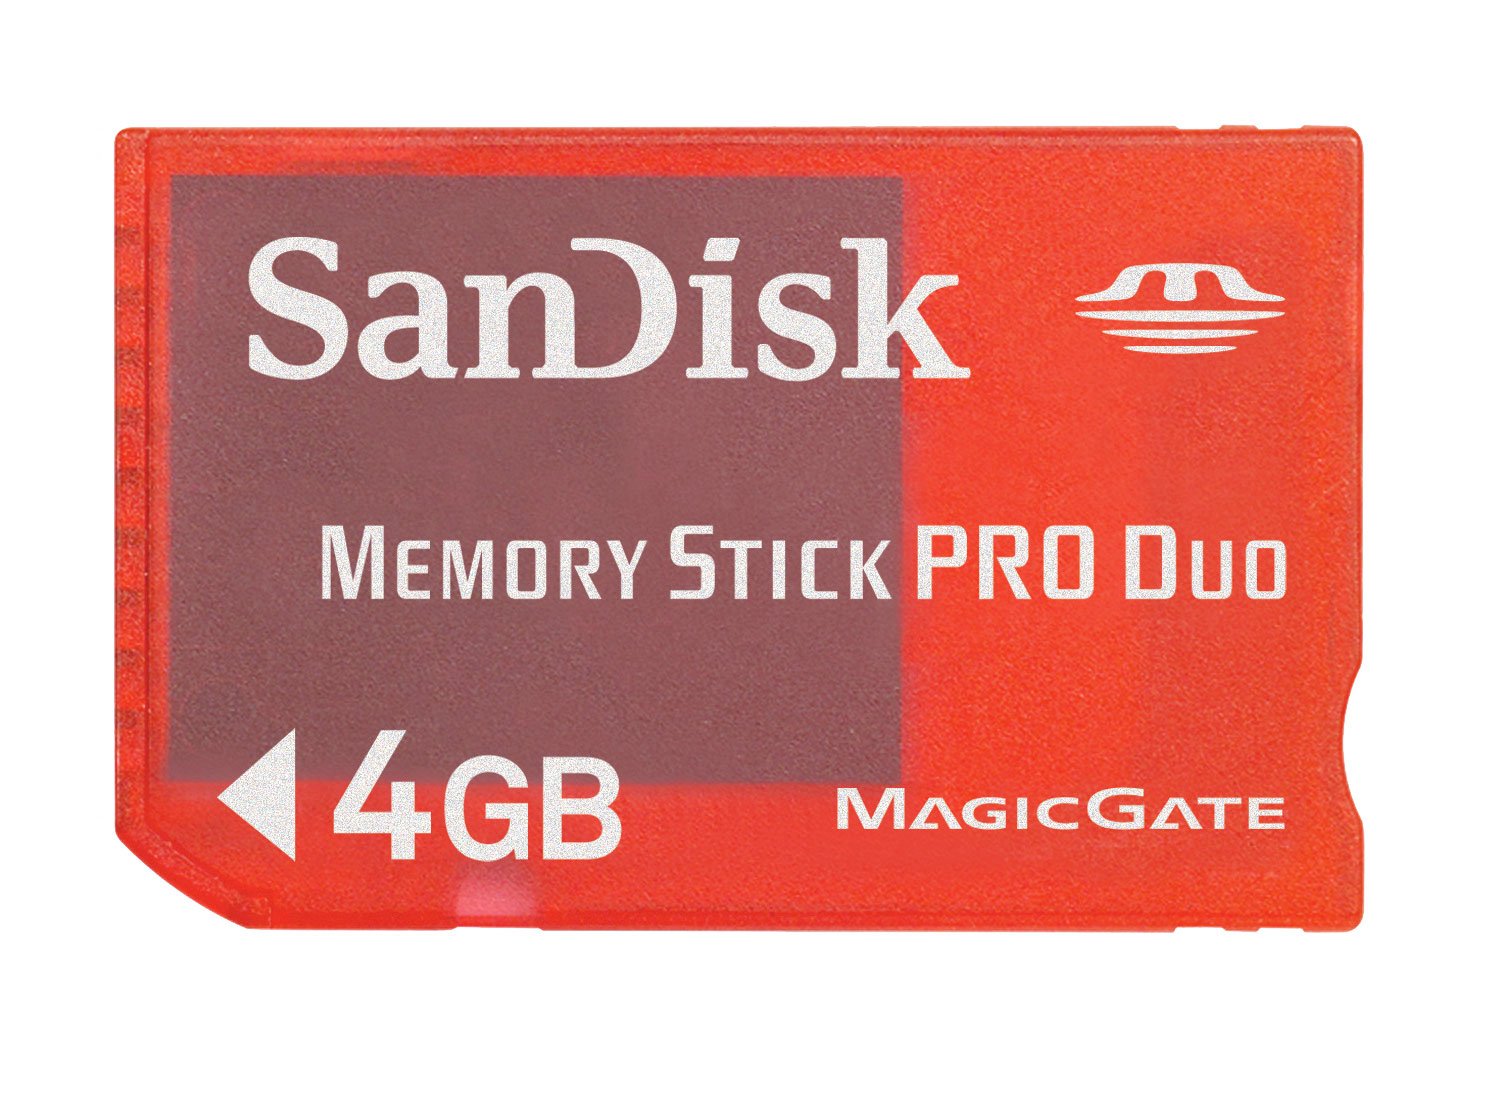 Sandisk 4GB PRO DUO GAMING (SDMSG-4096-A11)